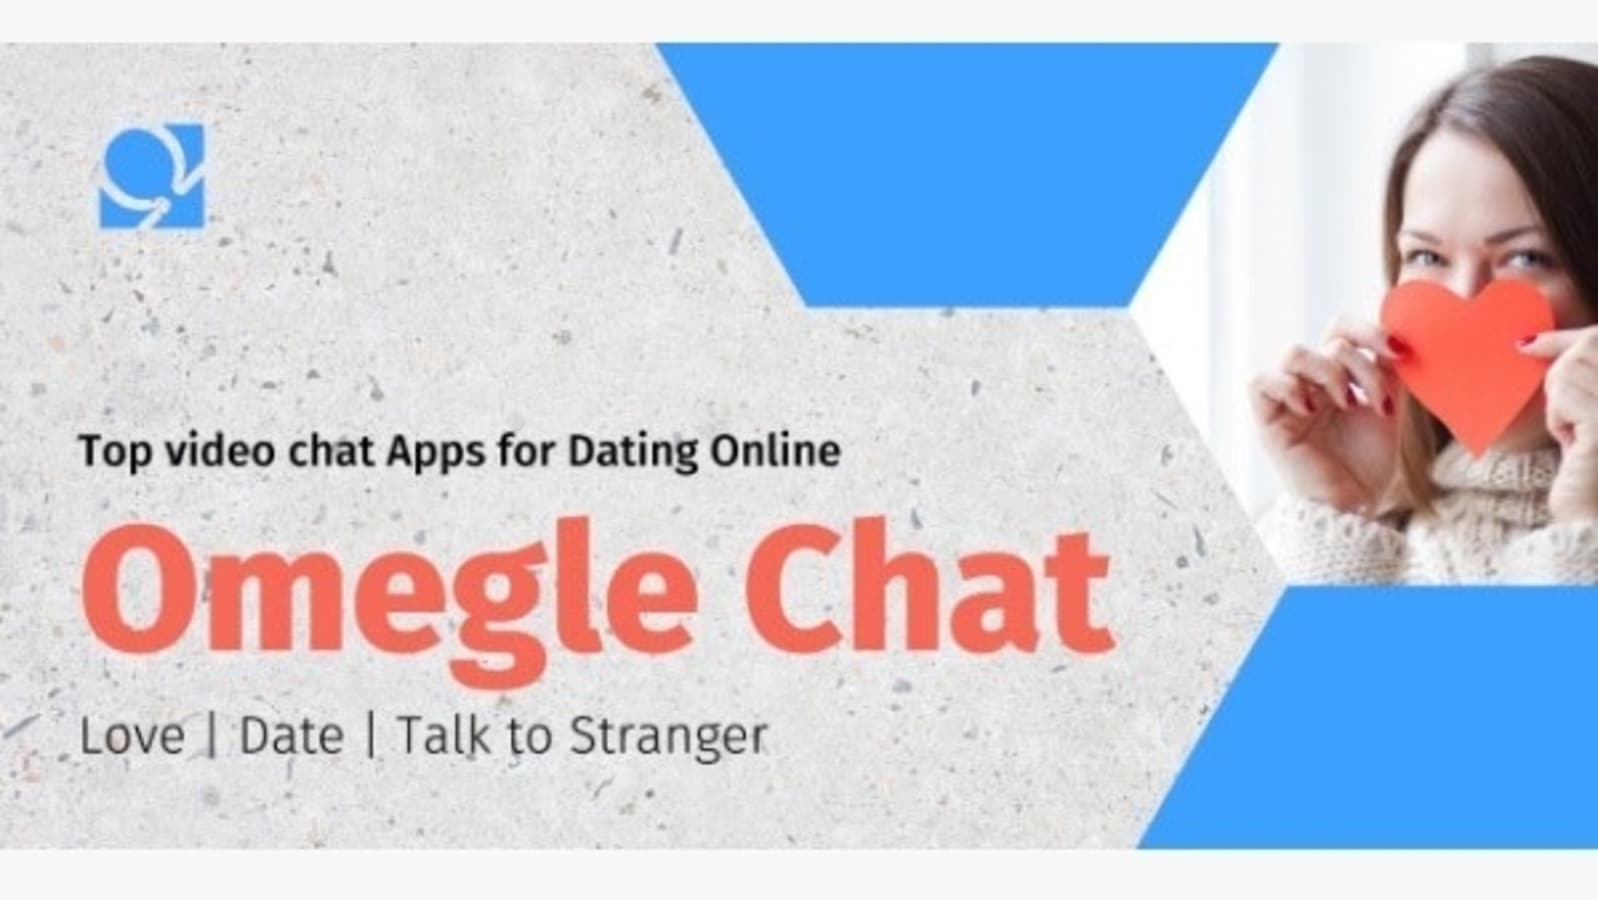 chat room dating review game